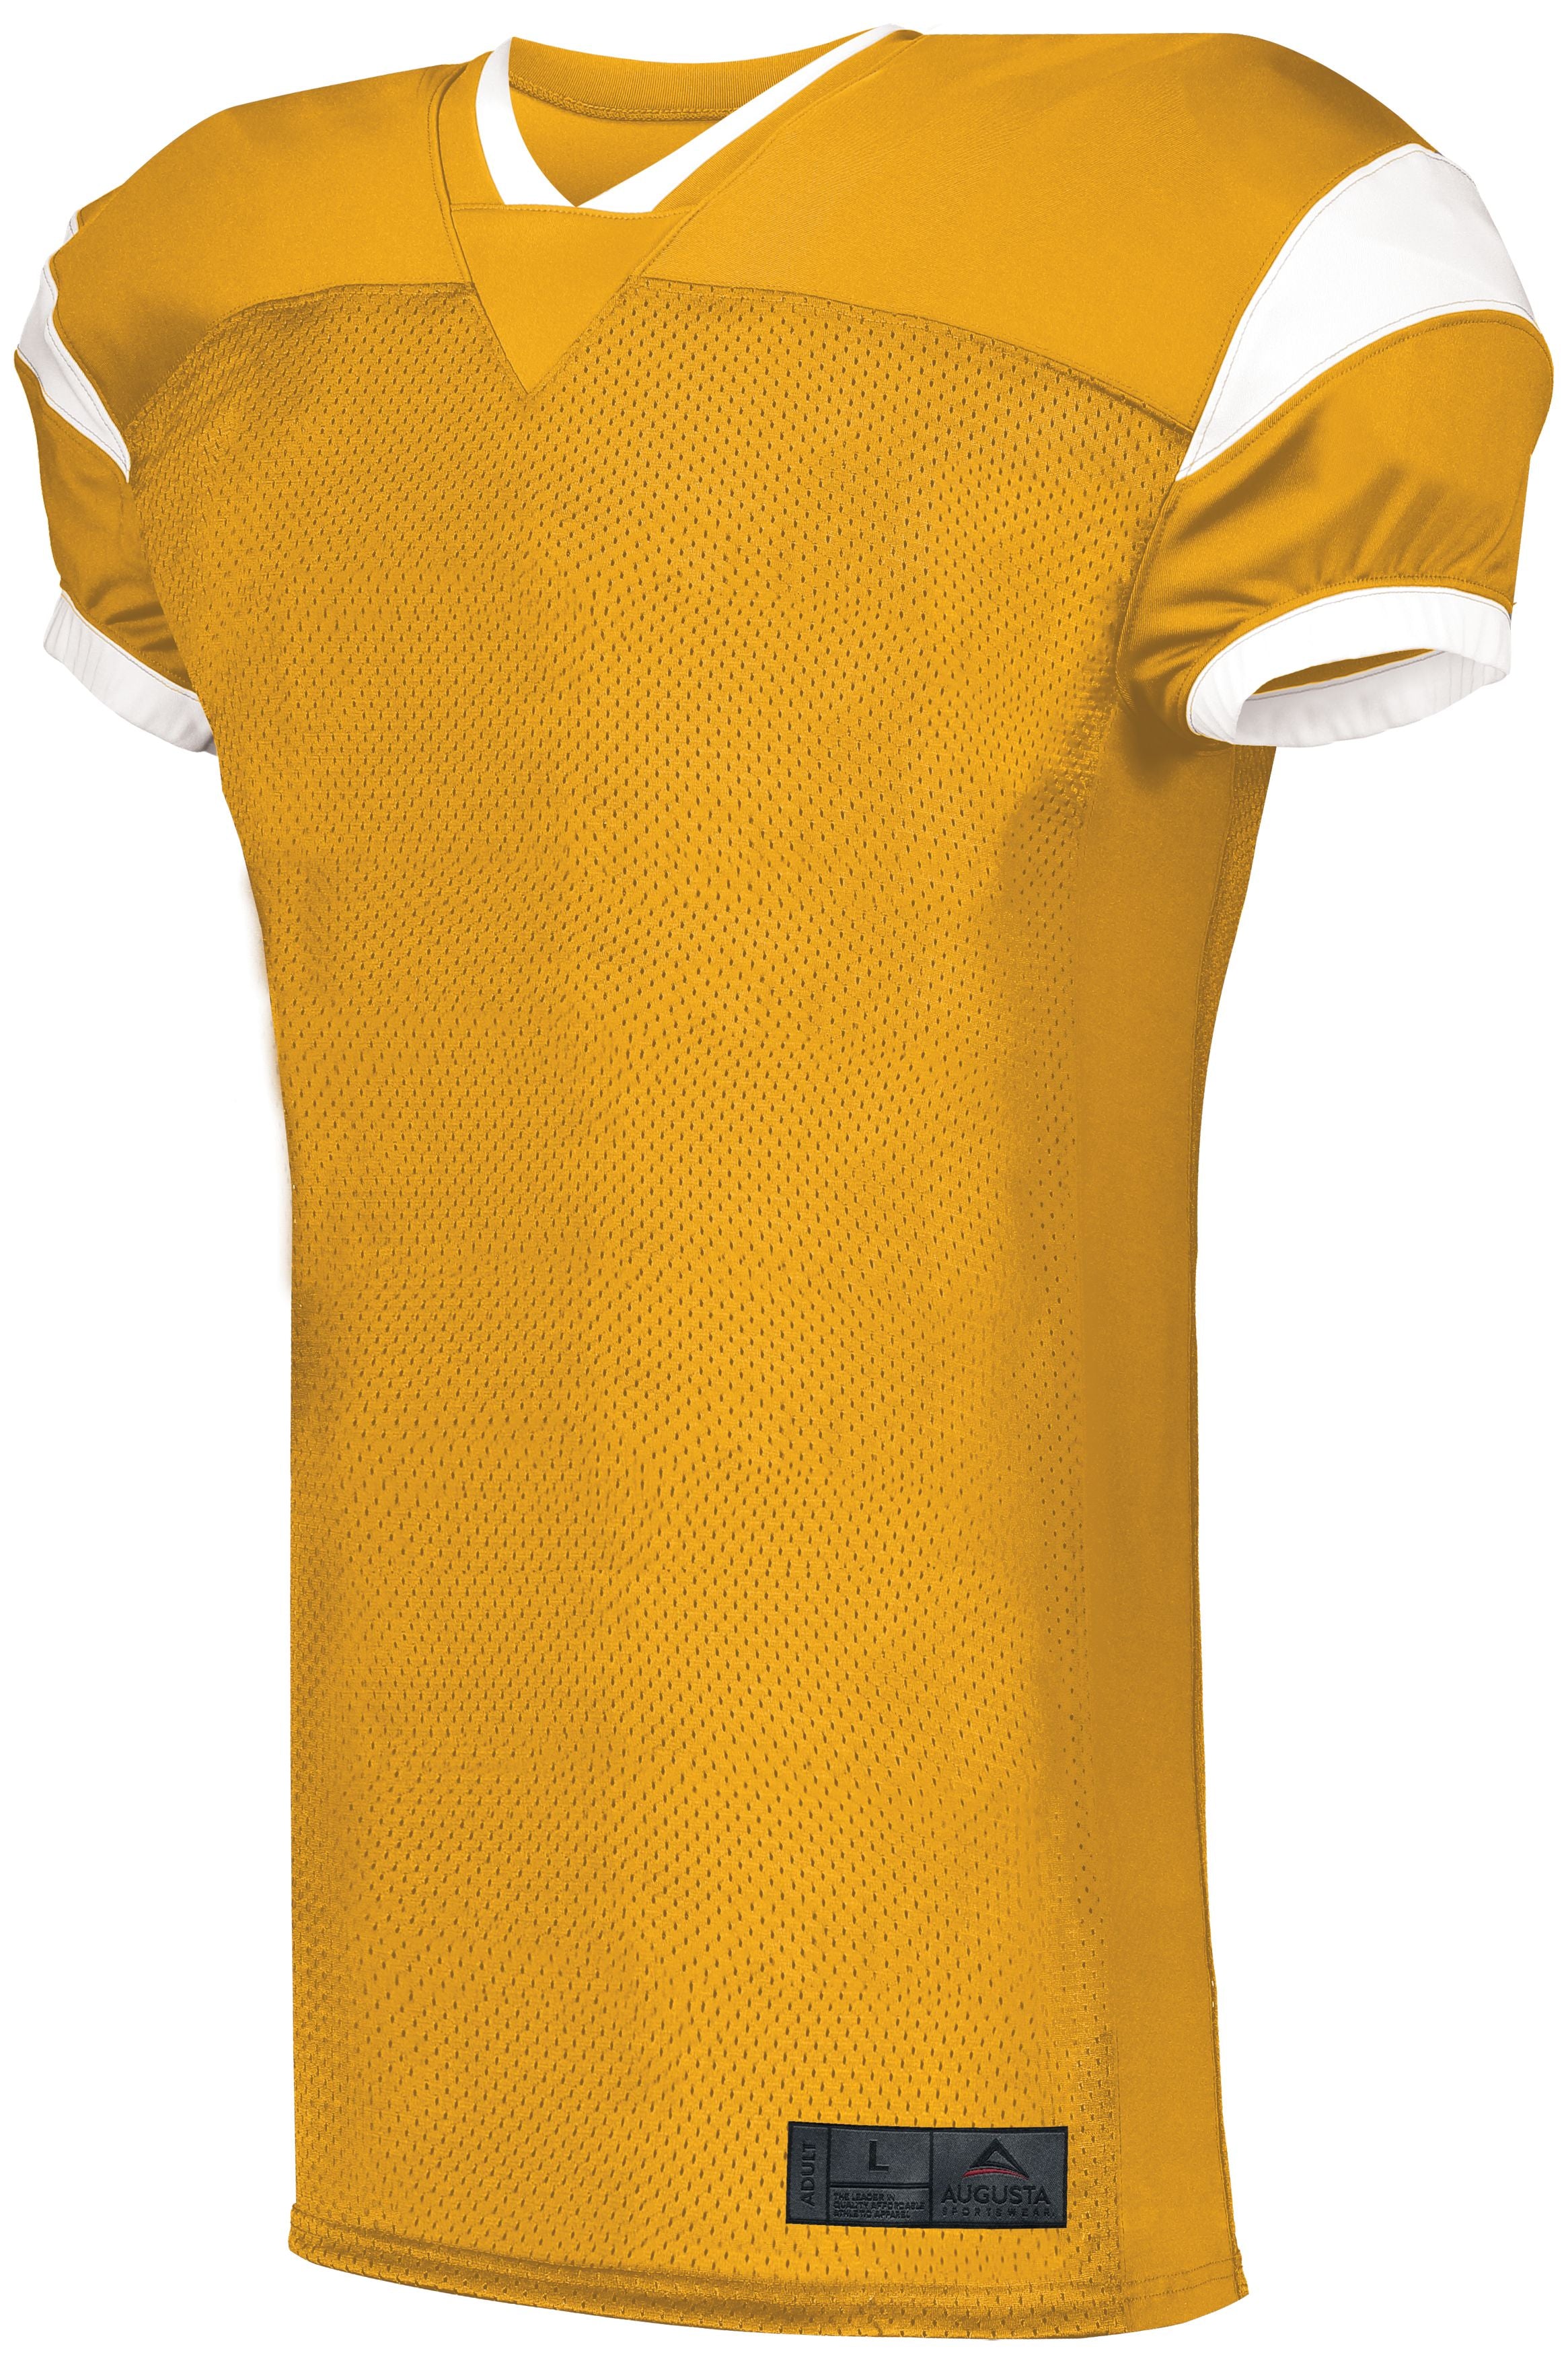 Augusta Sportswear Youth Slant Football Jersey in Gold/White  -Part of the Youth, Youth-Jersey, Augusta-Products, Football, Shirts, All-Sports, All-Sports-1 product lines at KanaleyCreations.com